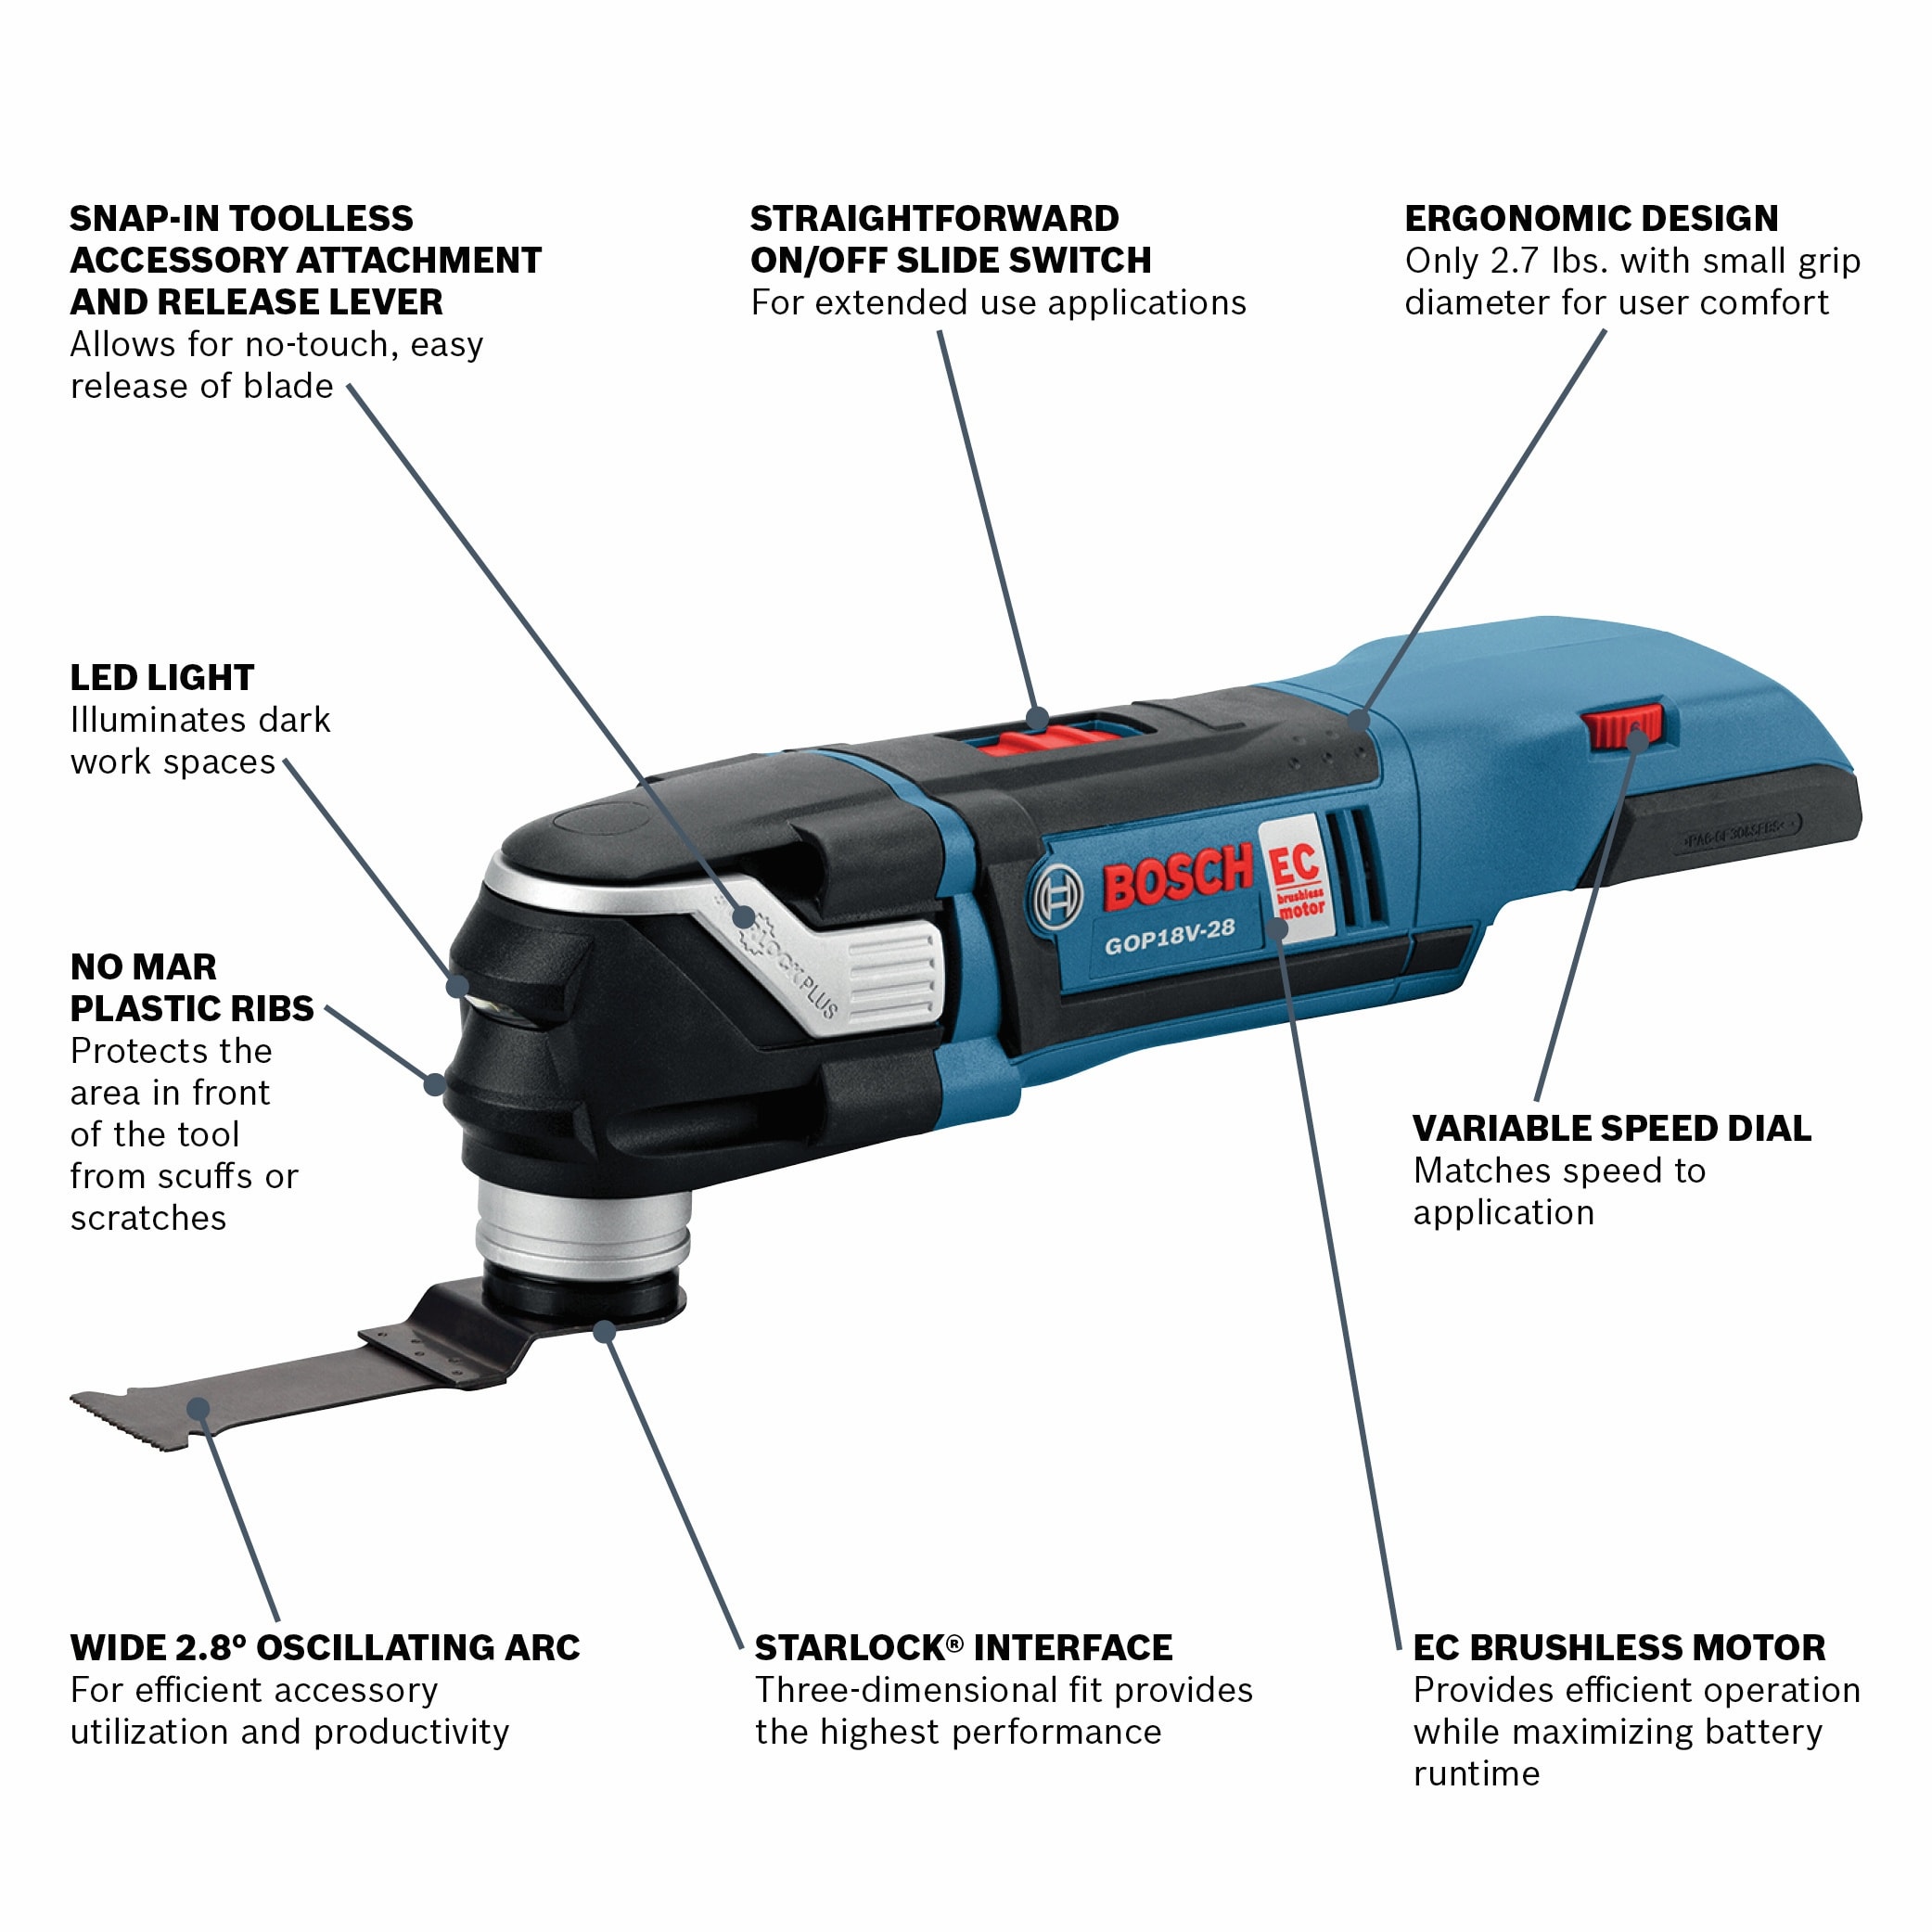 Bosch StarlockPlus at Oscillating the department 18-volt Oscillating Variable Speed Cordless Tool in Brushless Multi-Tool Kits